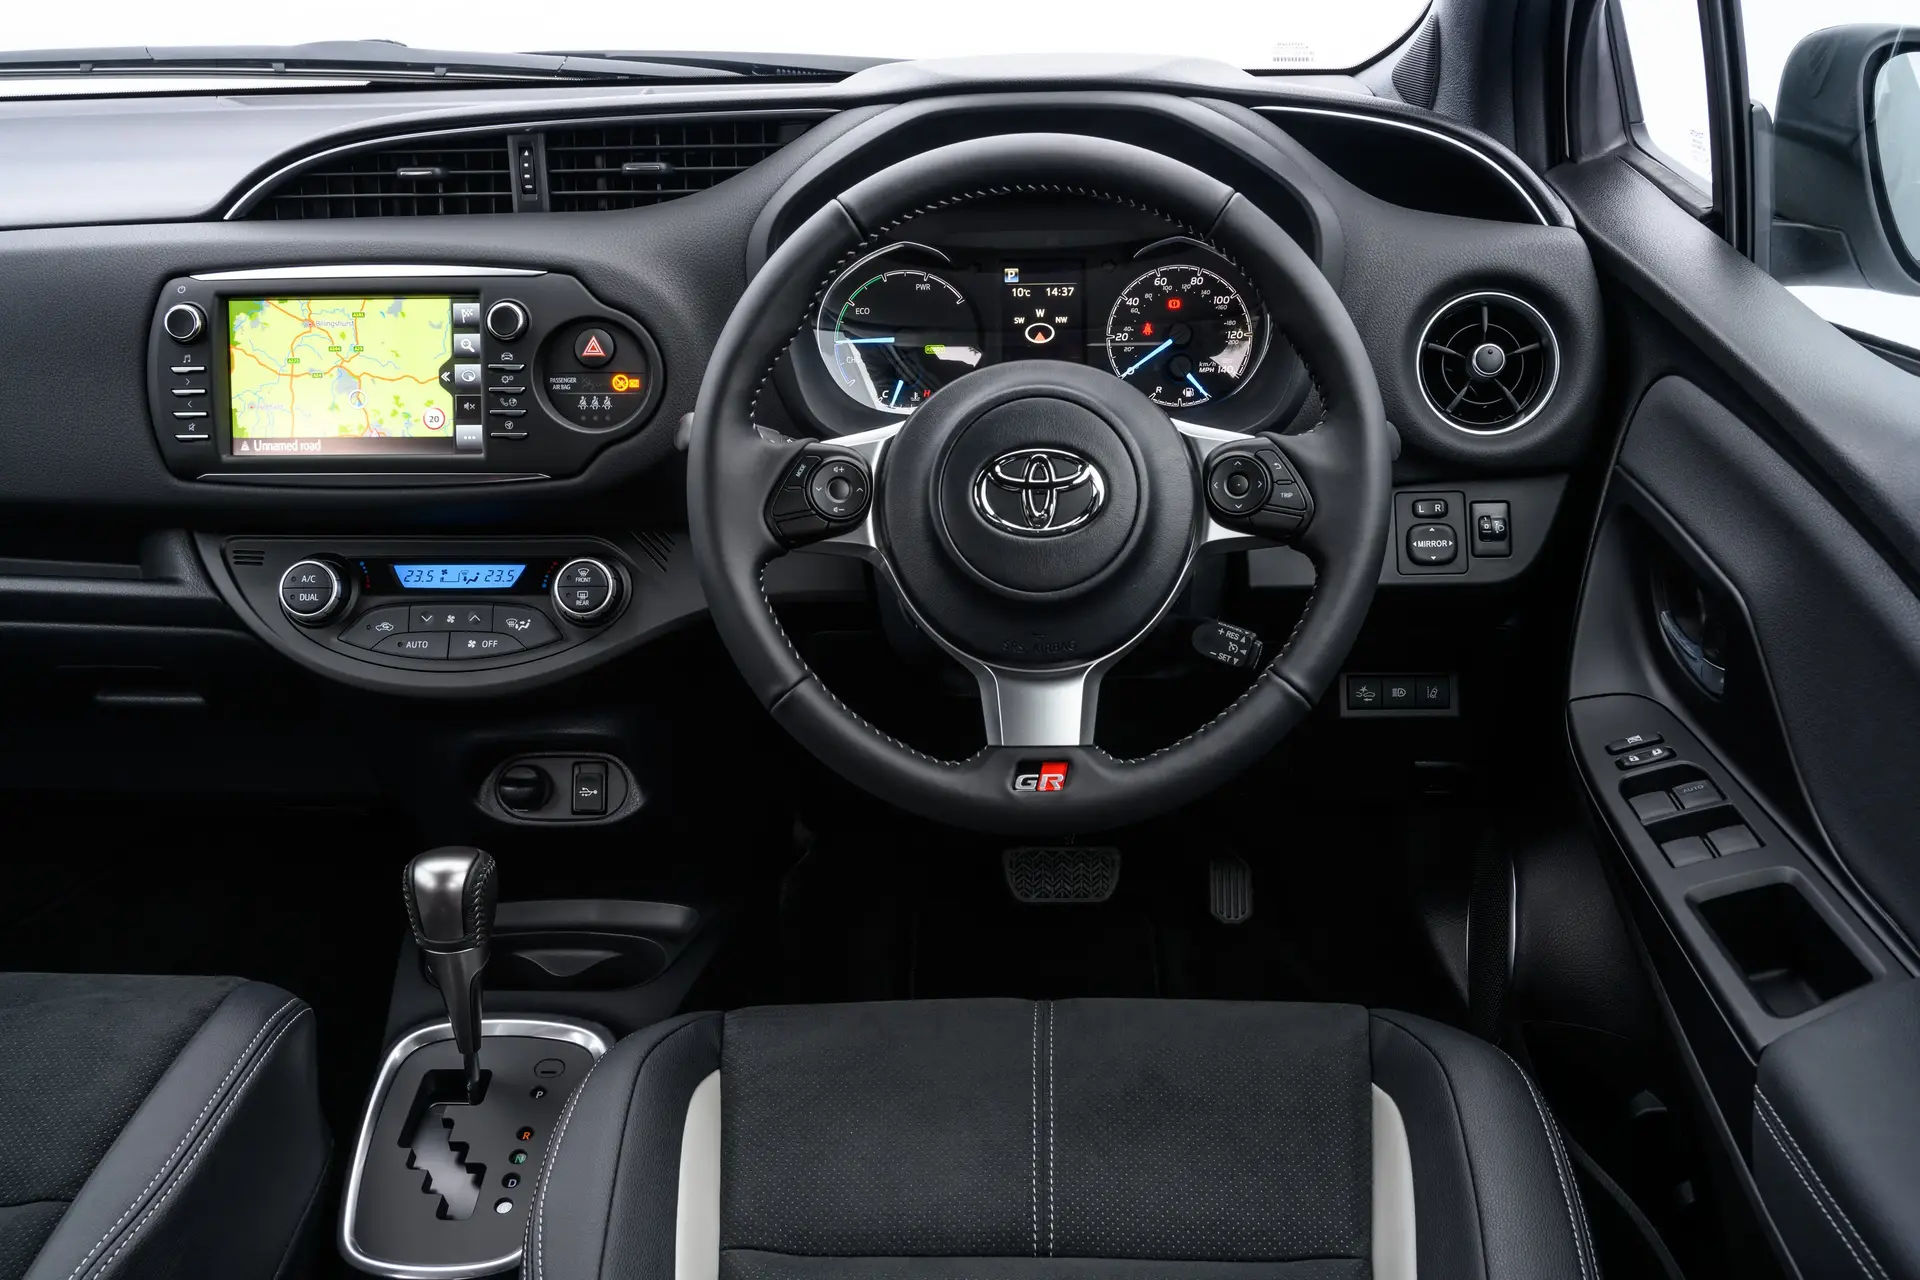 Toyota Yaris (2011-2020) Review: interior close up photo of the Toyota Yaris dashboard